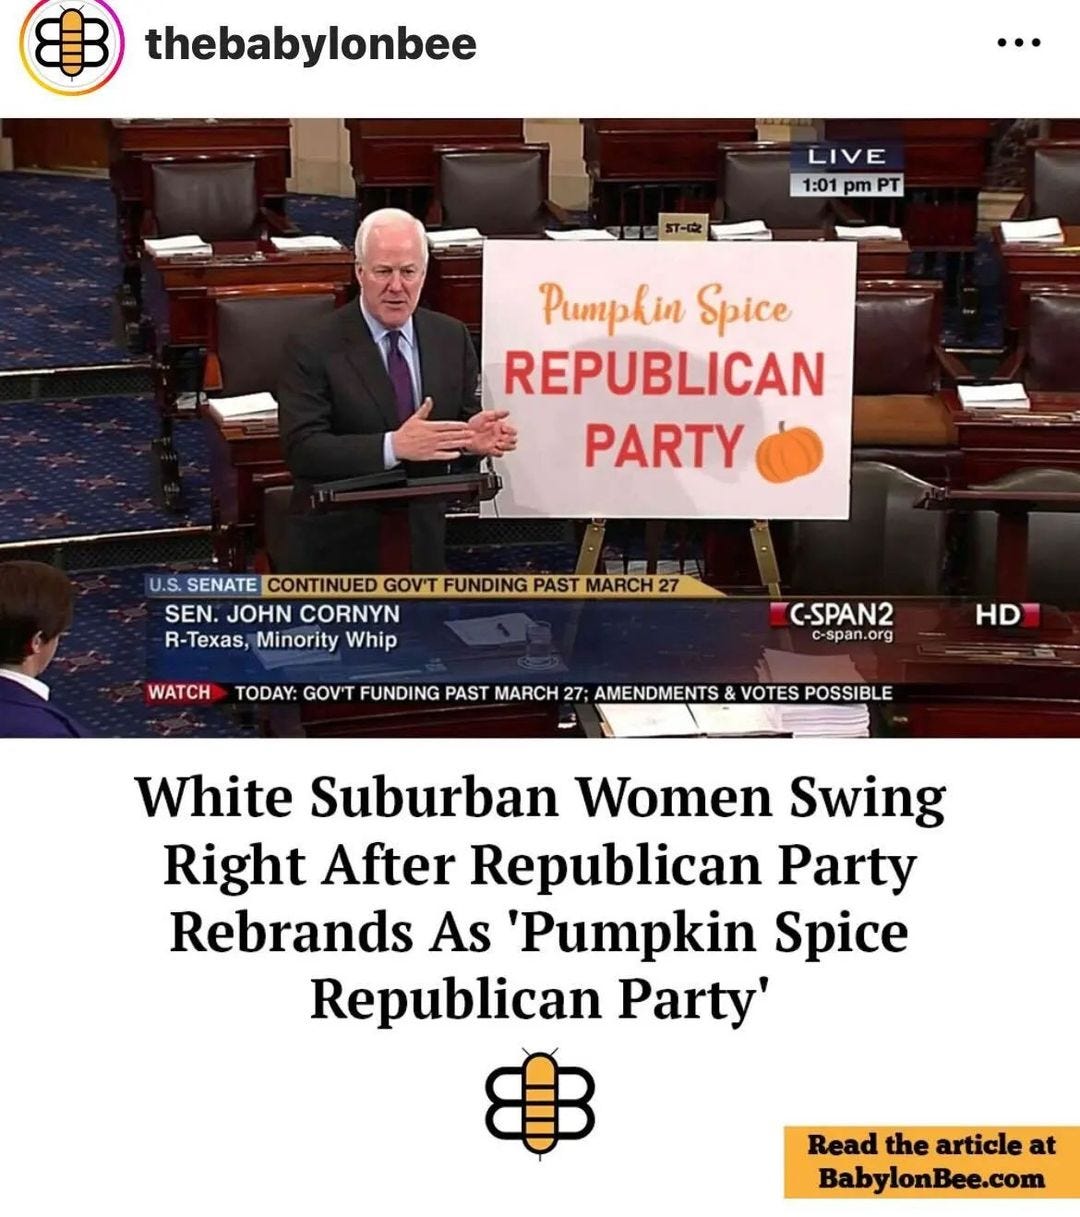 May be an image of 2 people and text that says 'thebabylonbee LIVE 1:01 pm PT Pumpkin Spice REPUBLICAN PARTY U.S. SENATE CONTINUED GOV'T FUNDING PAST MARCH SEN. JOHN CORNYN R-Texas, Minority Whip WATCH C-SPAN2 c-span.org TODAY: GOV'T FUNDING PAST MARCH 27; AMENDMENTS& VOTES POSSIBLE HD White Suburban Women Swing Right After Republican Party Rebrands As 'Pumpkin Spice Republican Party' Read the article at BabylonBee.com'